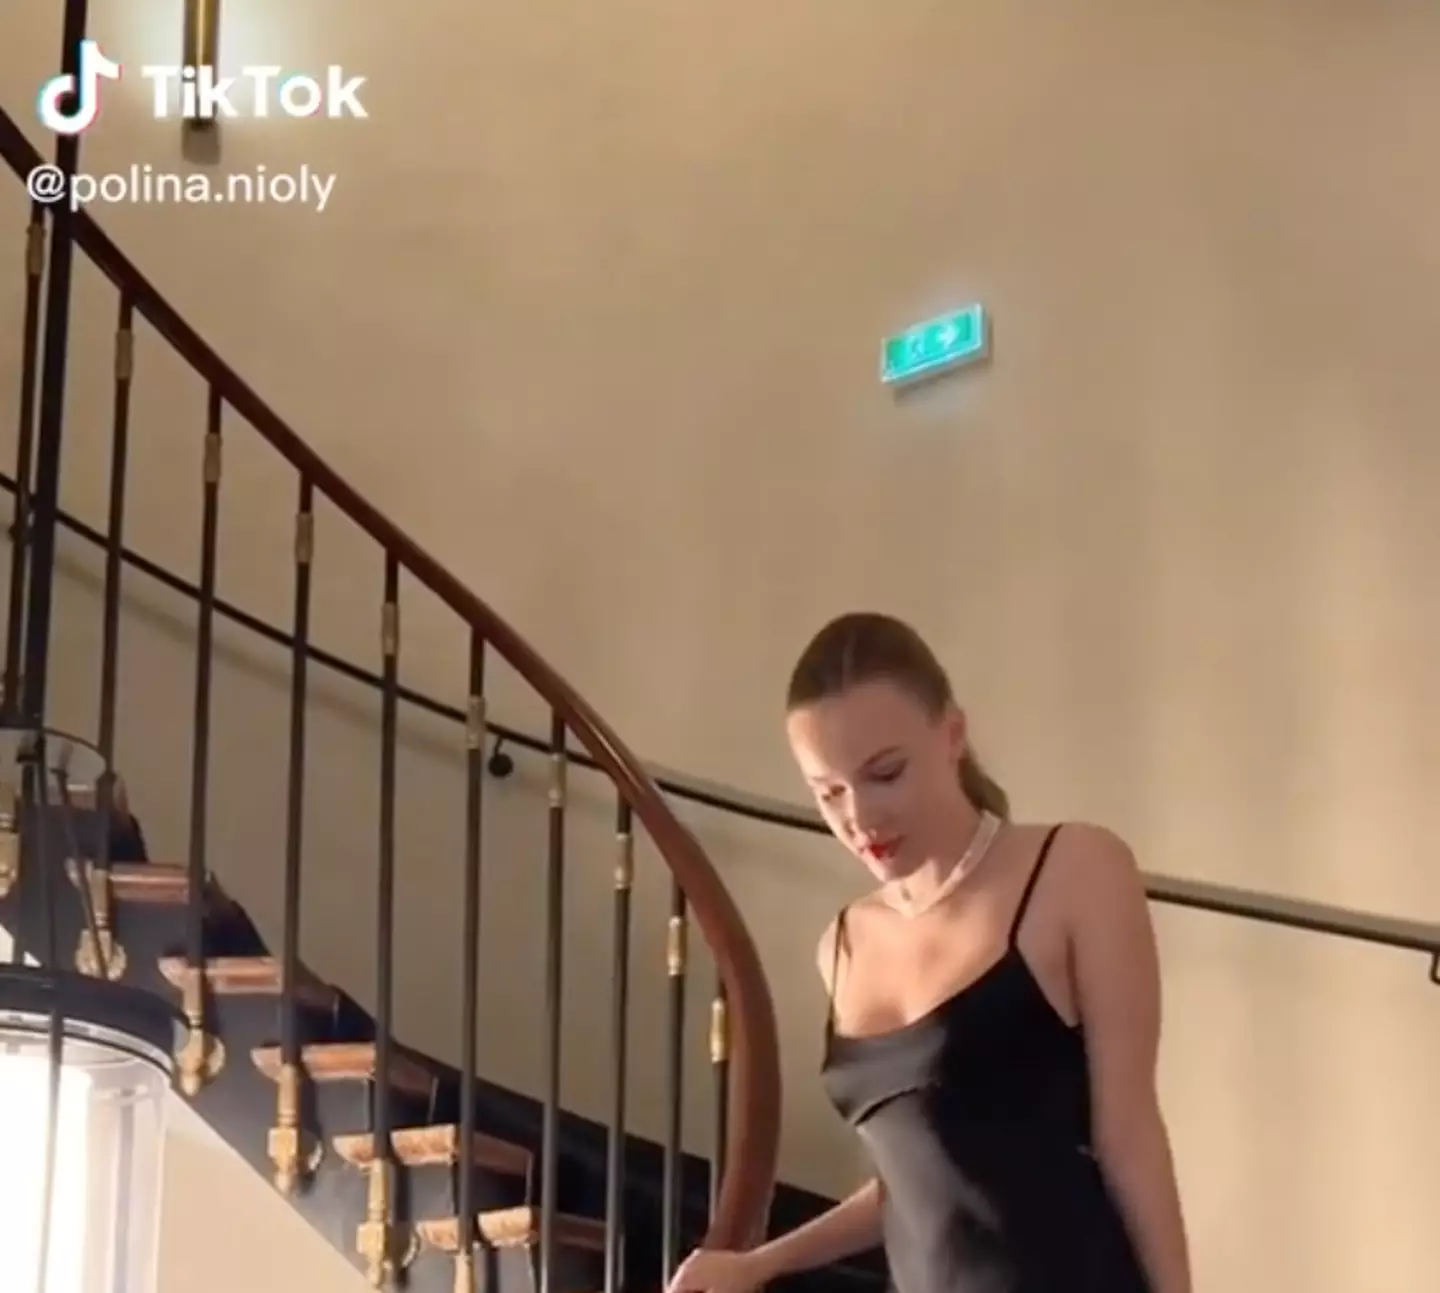 TikTok users are obsessed with Polina's revenge. (